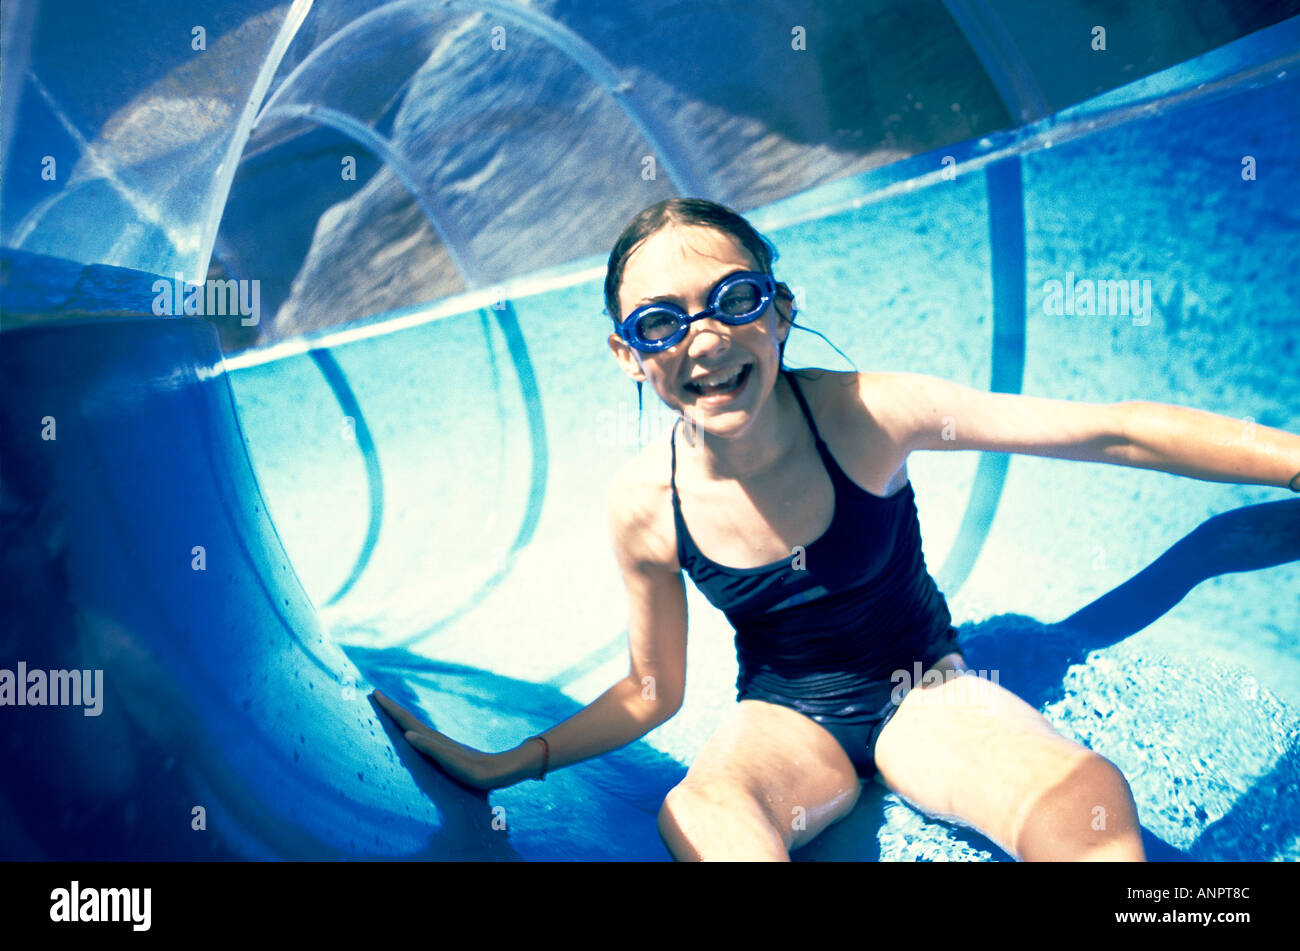 Girl on a water slide at an aqua park Stock Photo